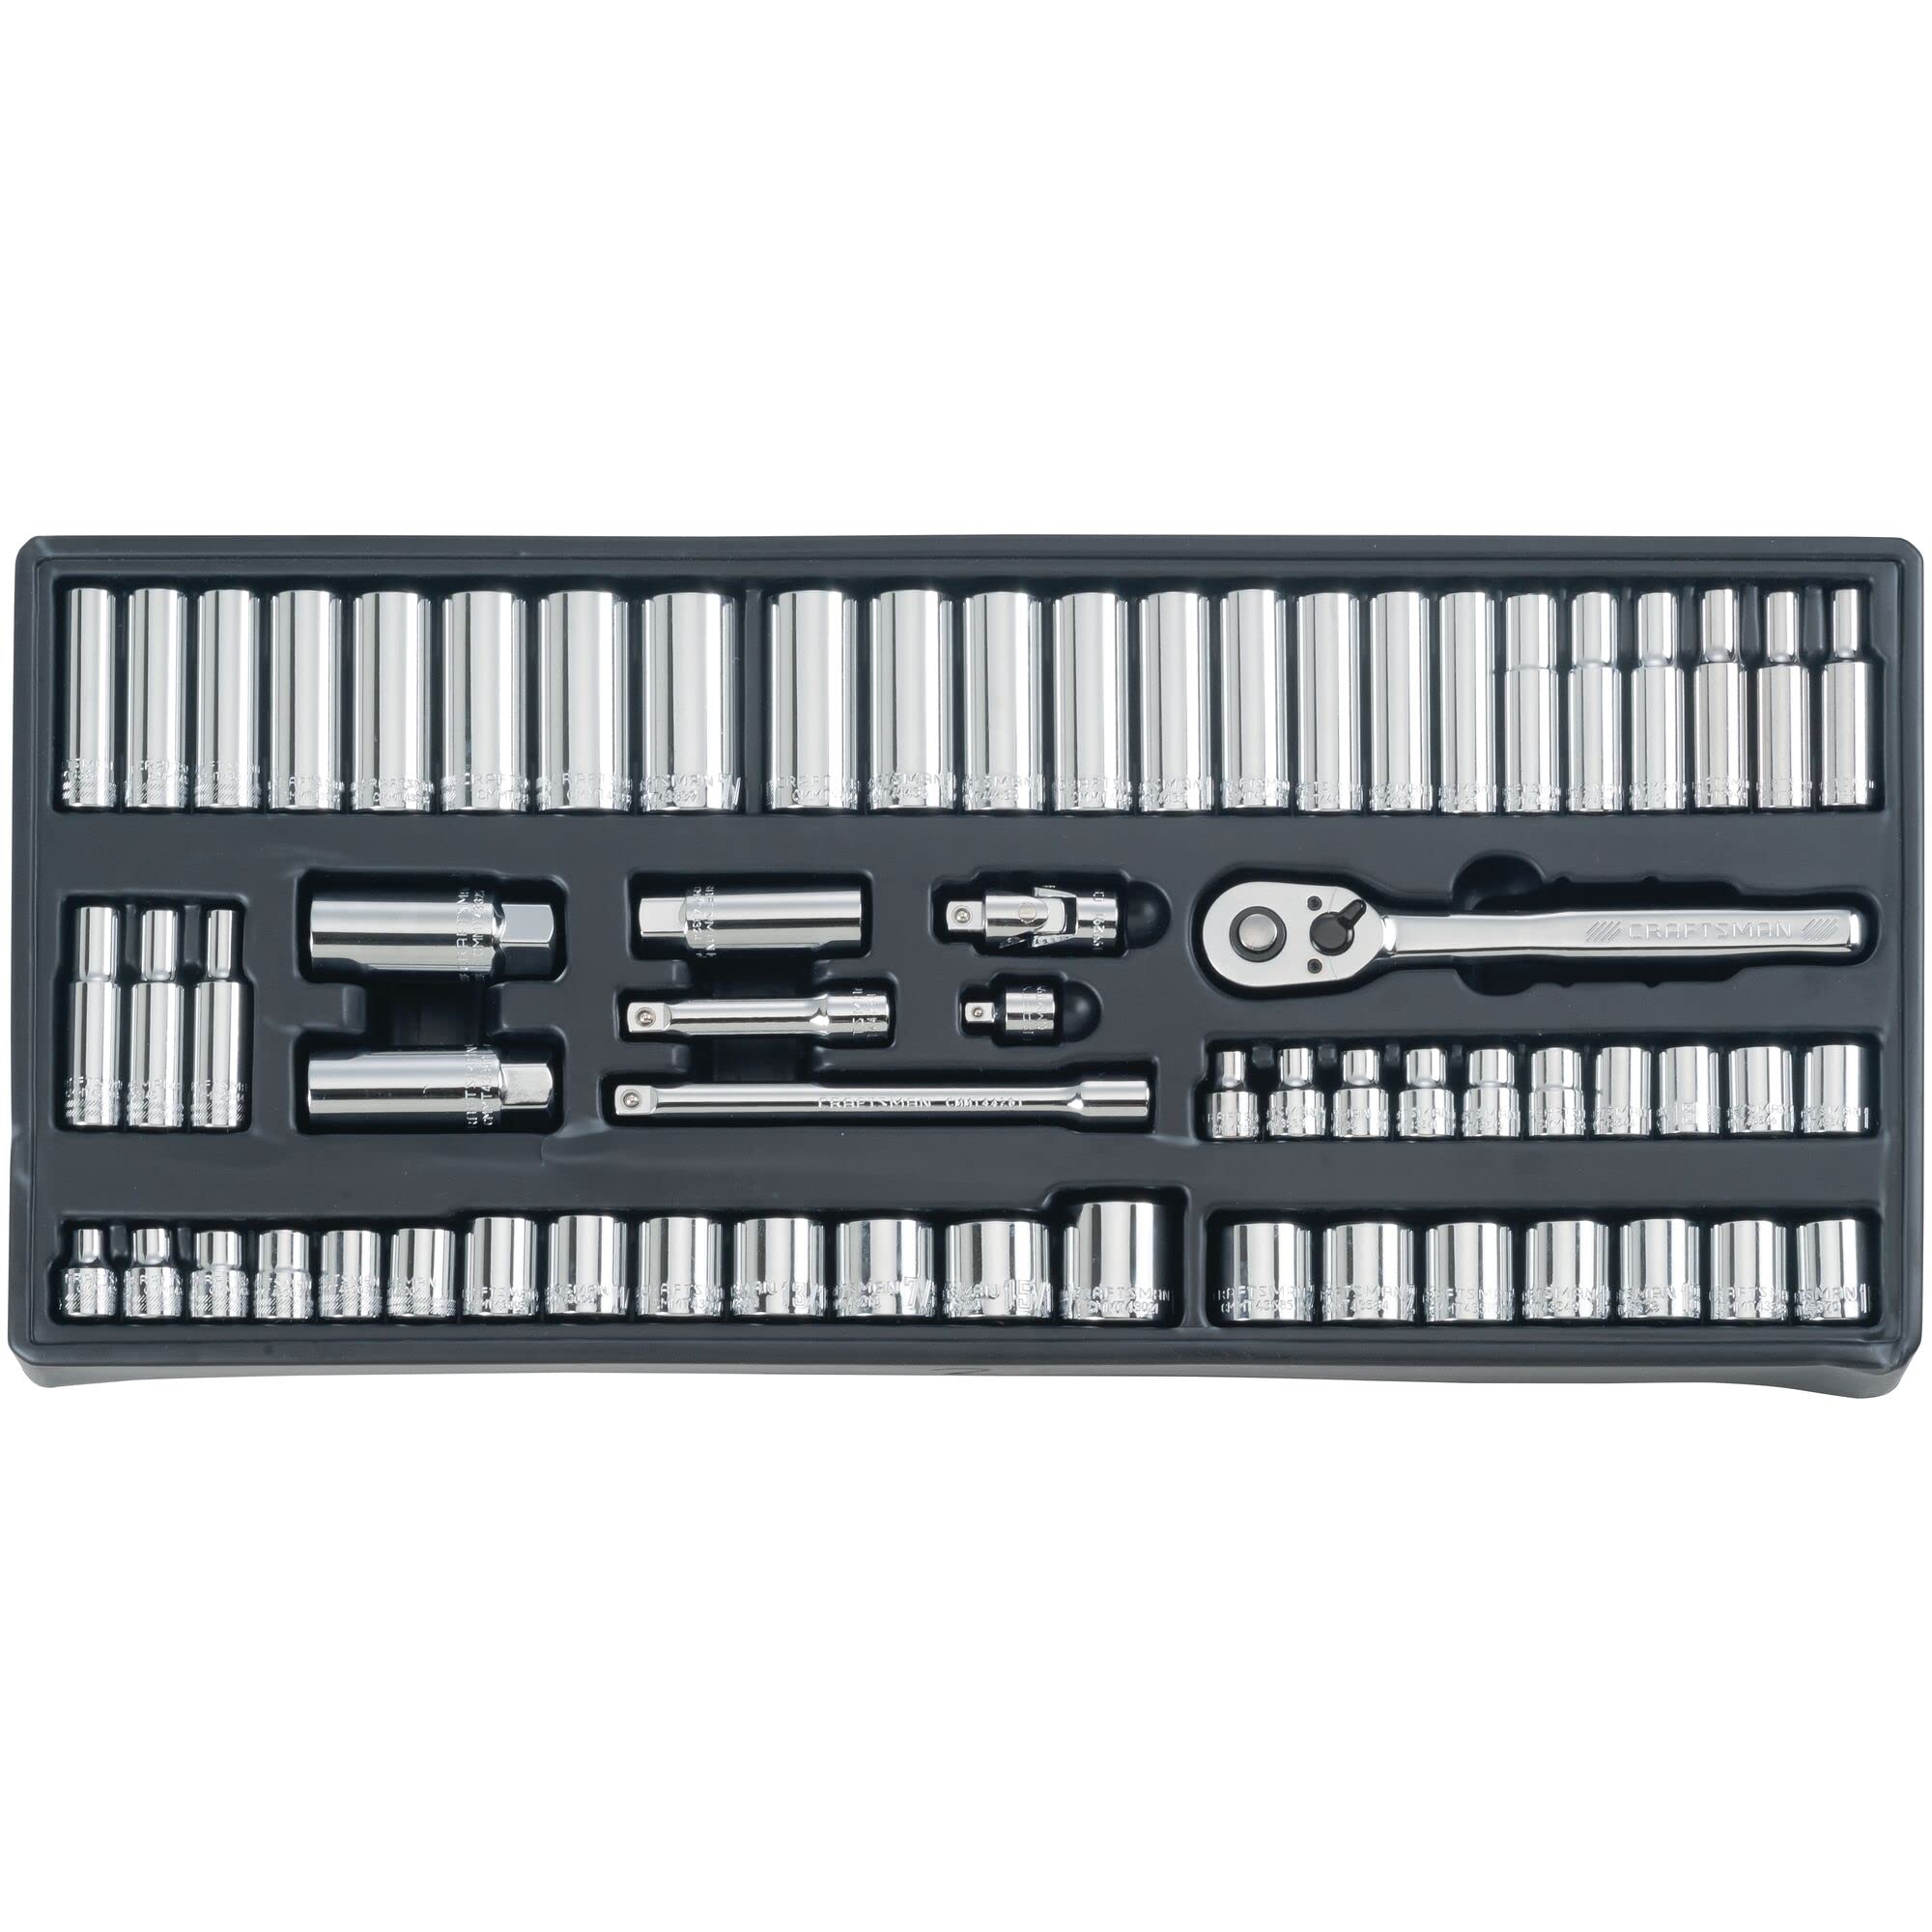 Craftsman 1/4, 3/8 and 1/2 in. drive Metric and SAE 6 and 12 Point Mechanics Tool Set 308 pc. - image 3 of 6